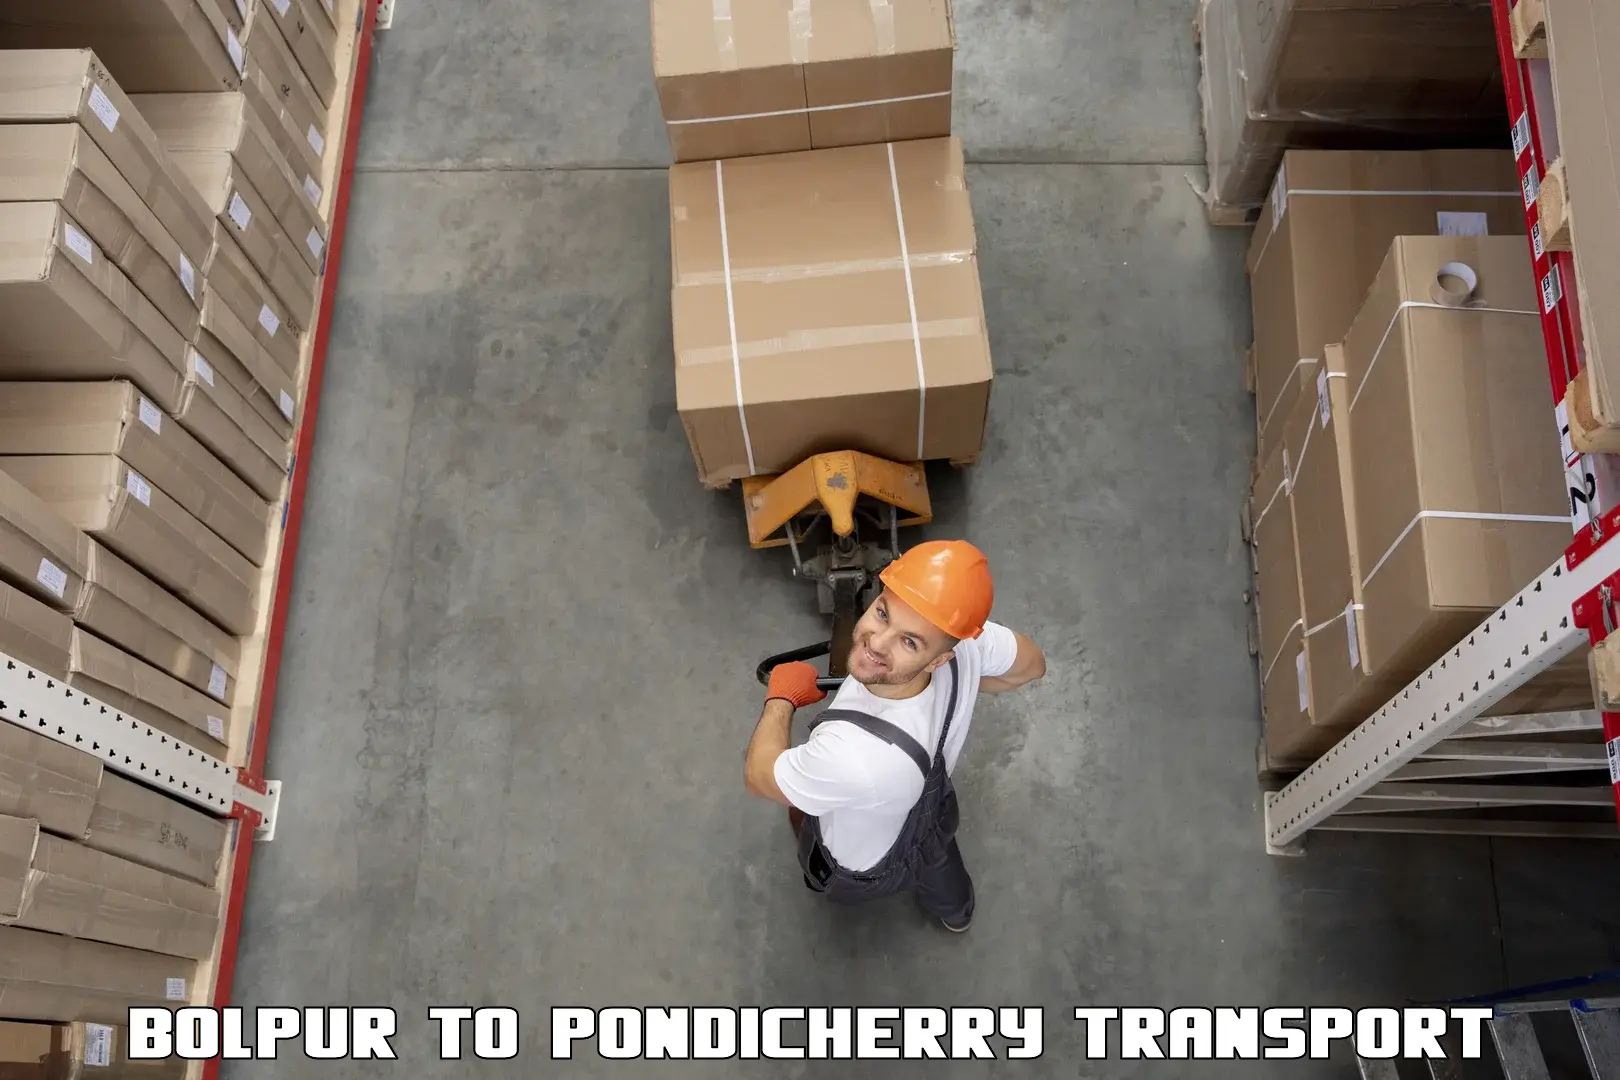 Air freight transport services Bolpur to Pondicherry